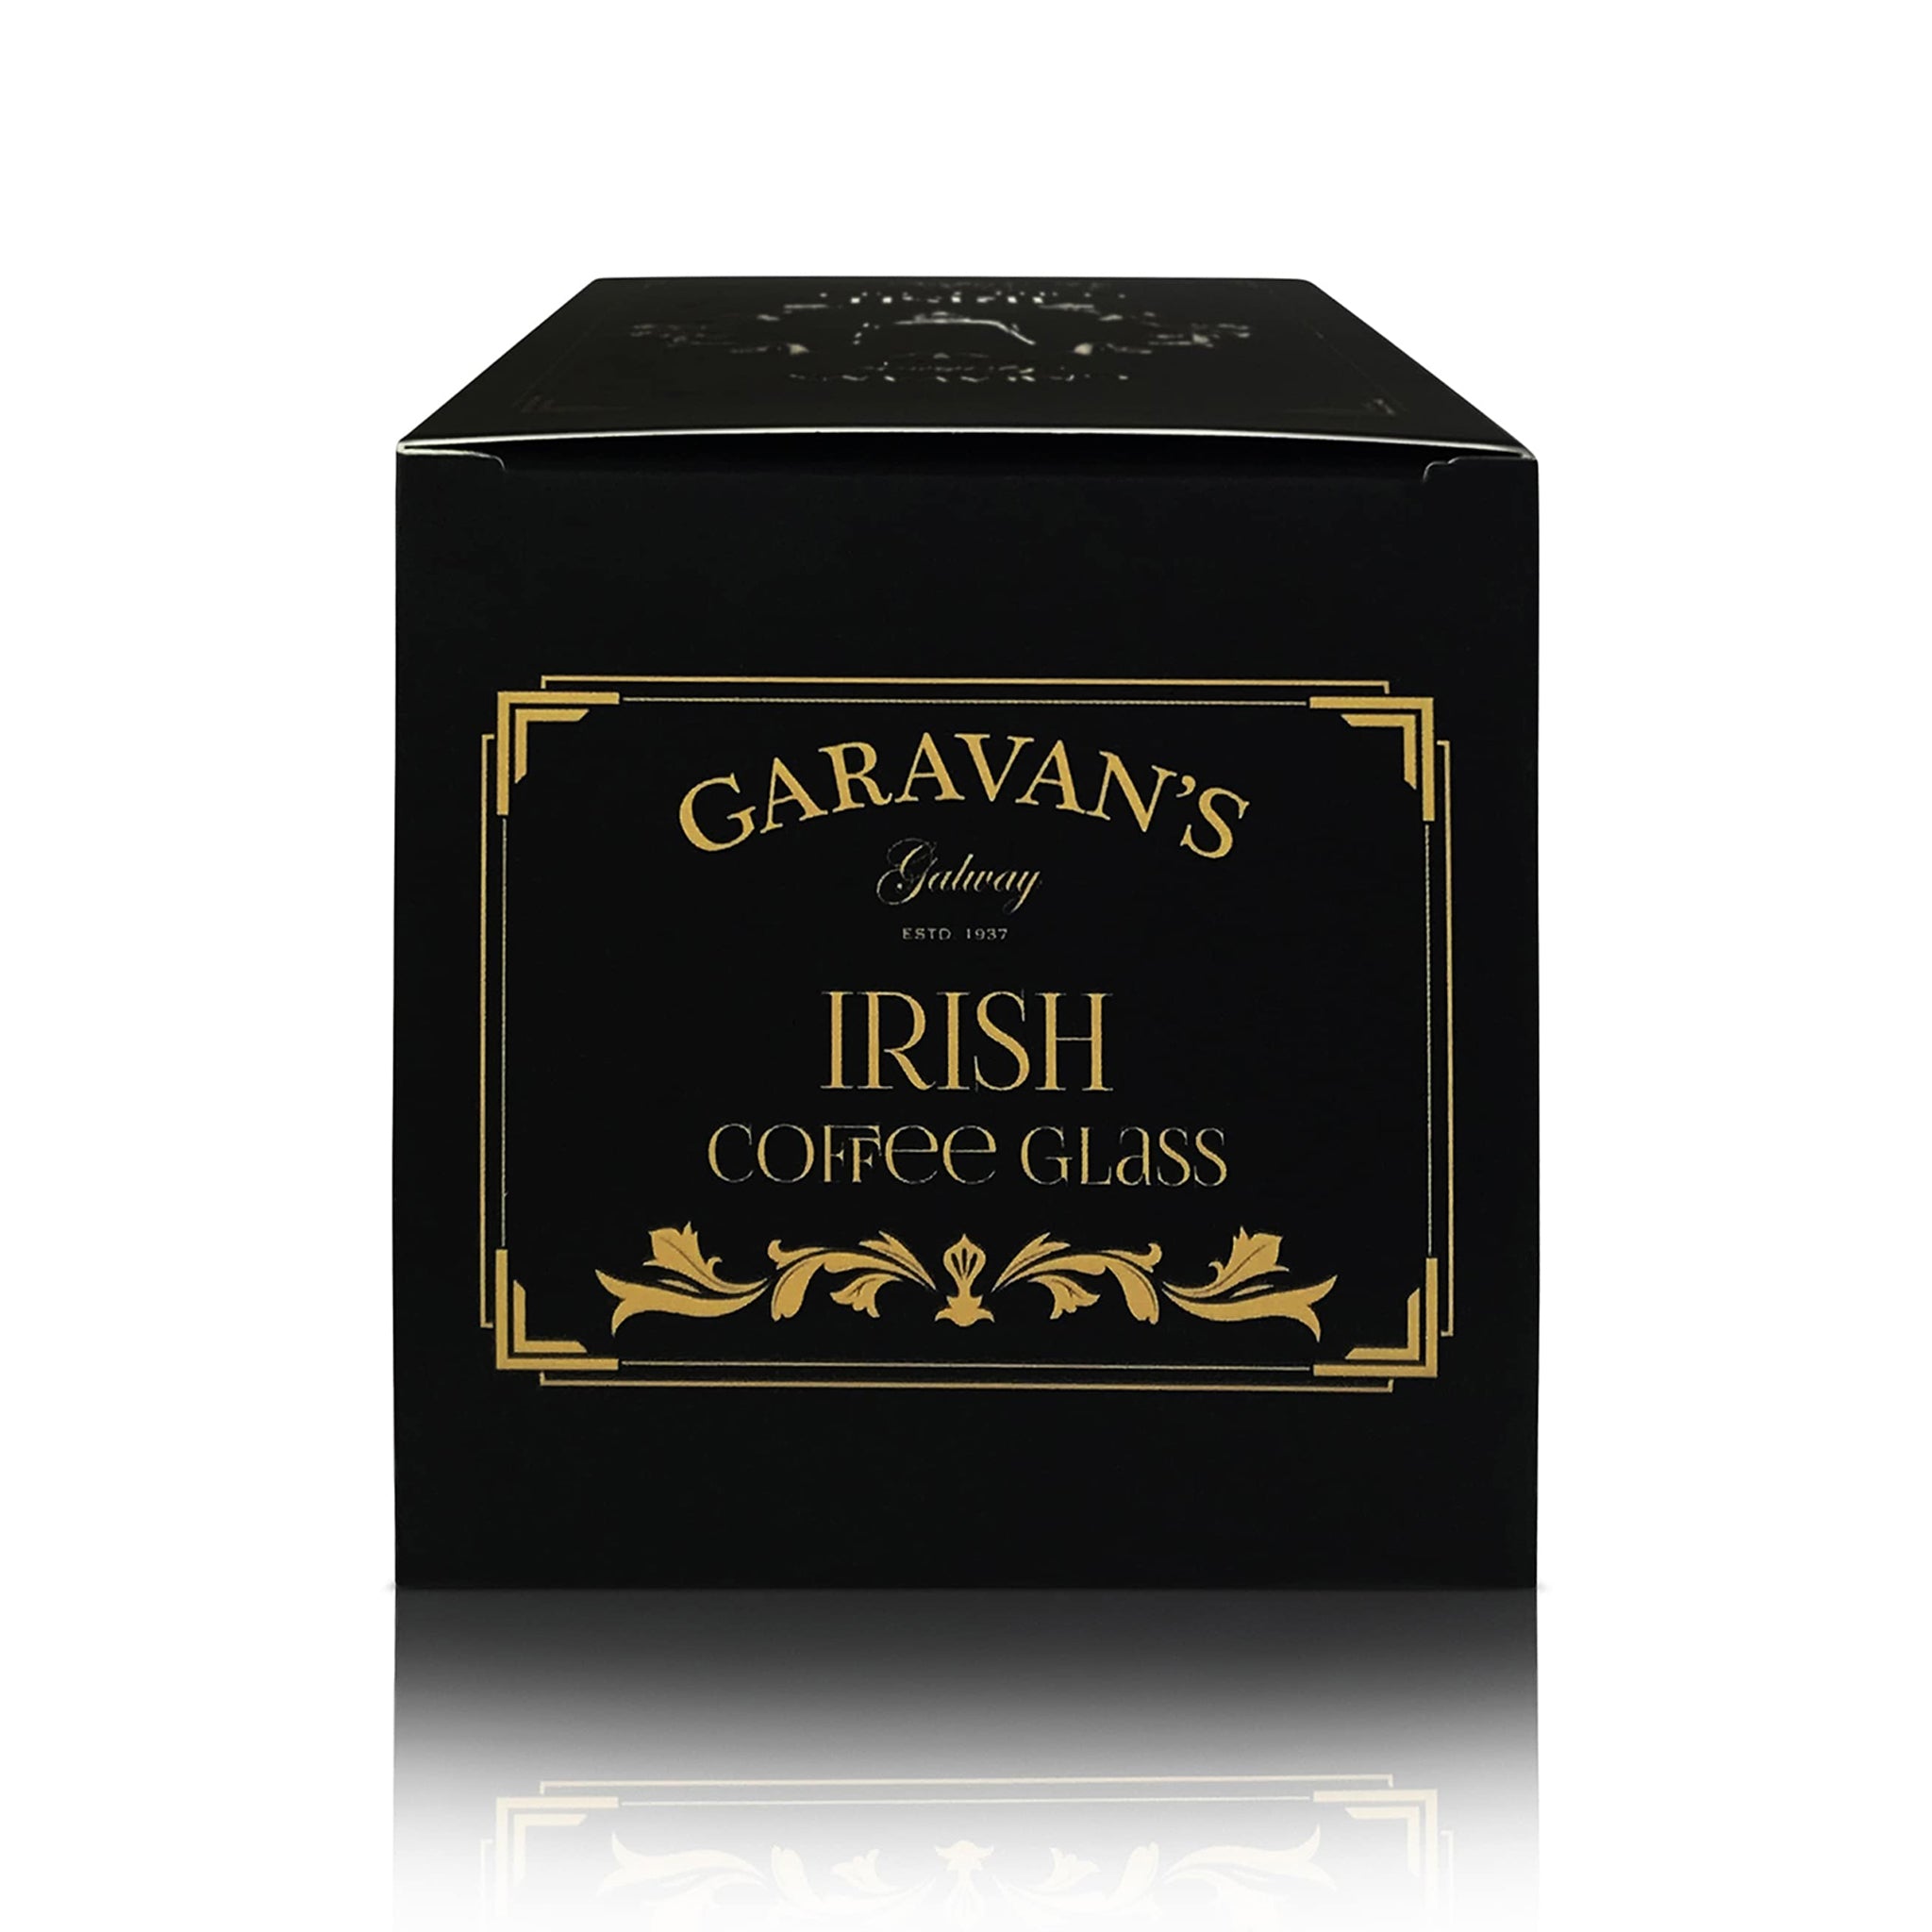 Garavan’s Irish Coffee Glass - Handcrafted for the Perfect Irish Coffee Experience - Authentic Gift for Coffee Enthusiasts - Exclusively Available Here